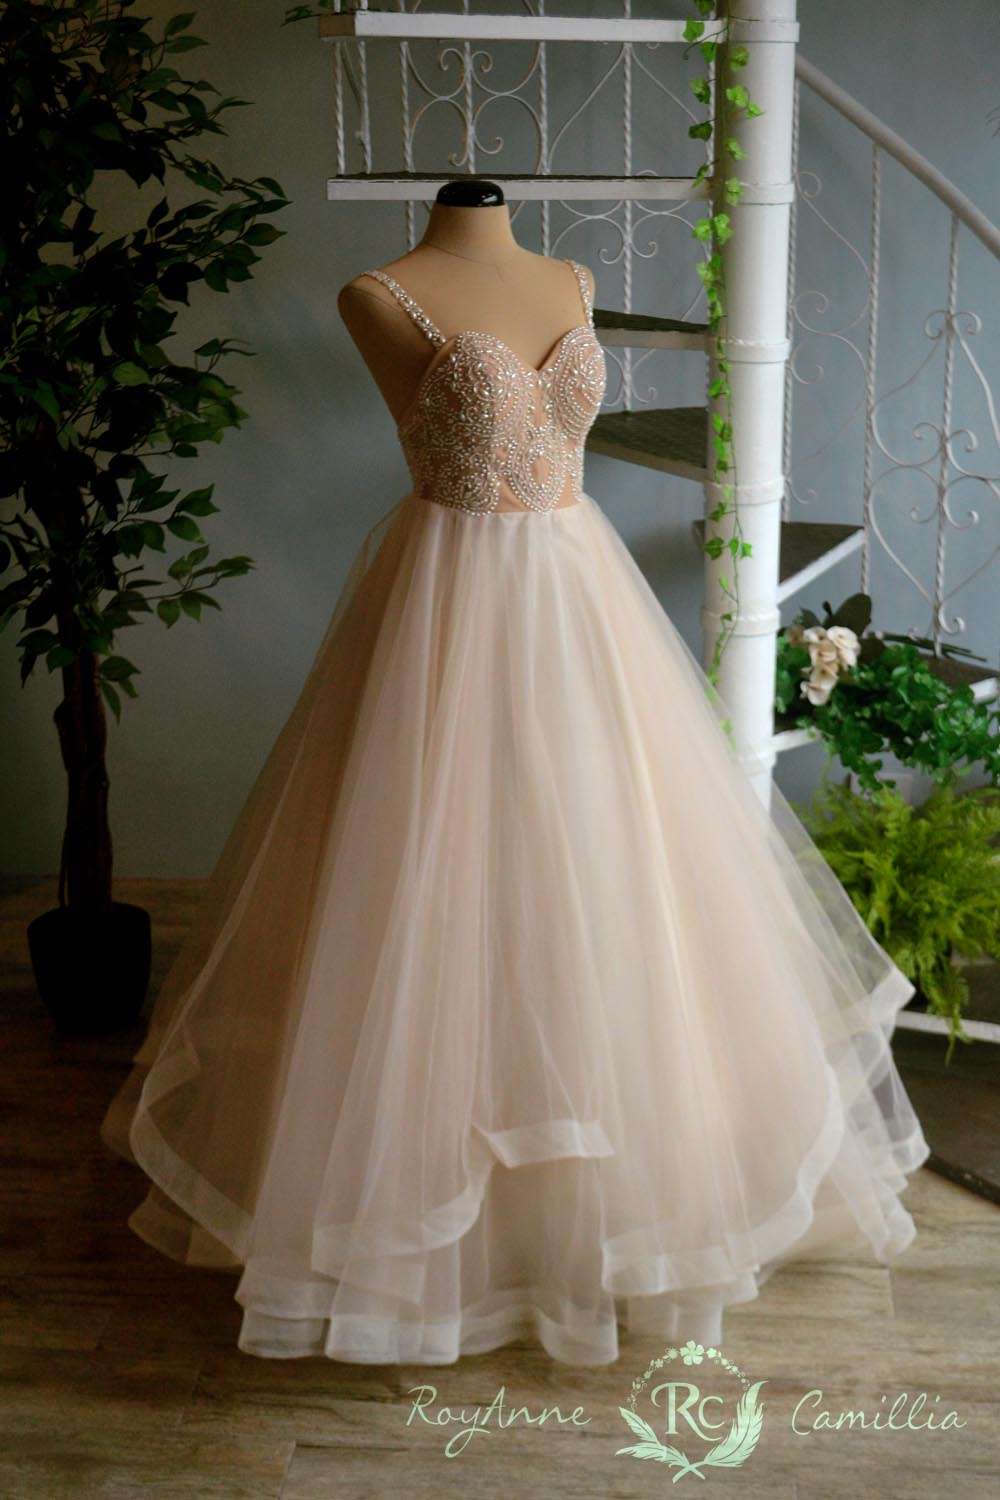 Elaine RoyAnne Camillia Couture Bridal  Gowns  and Gown  